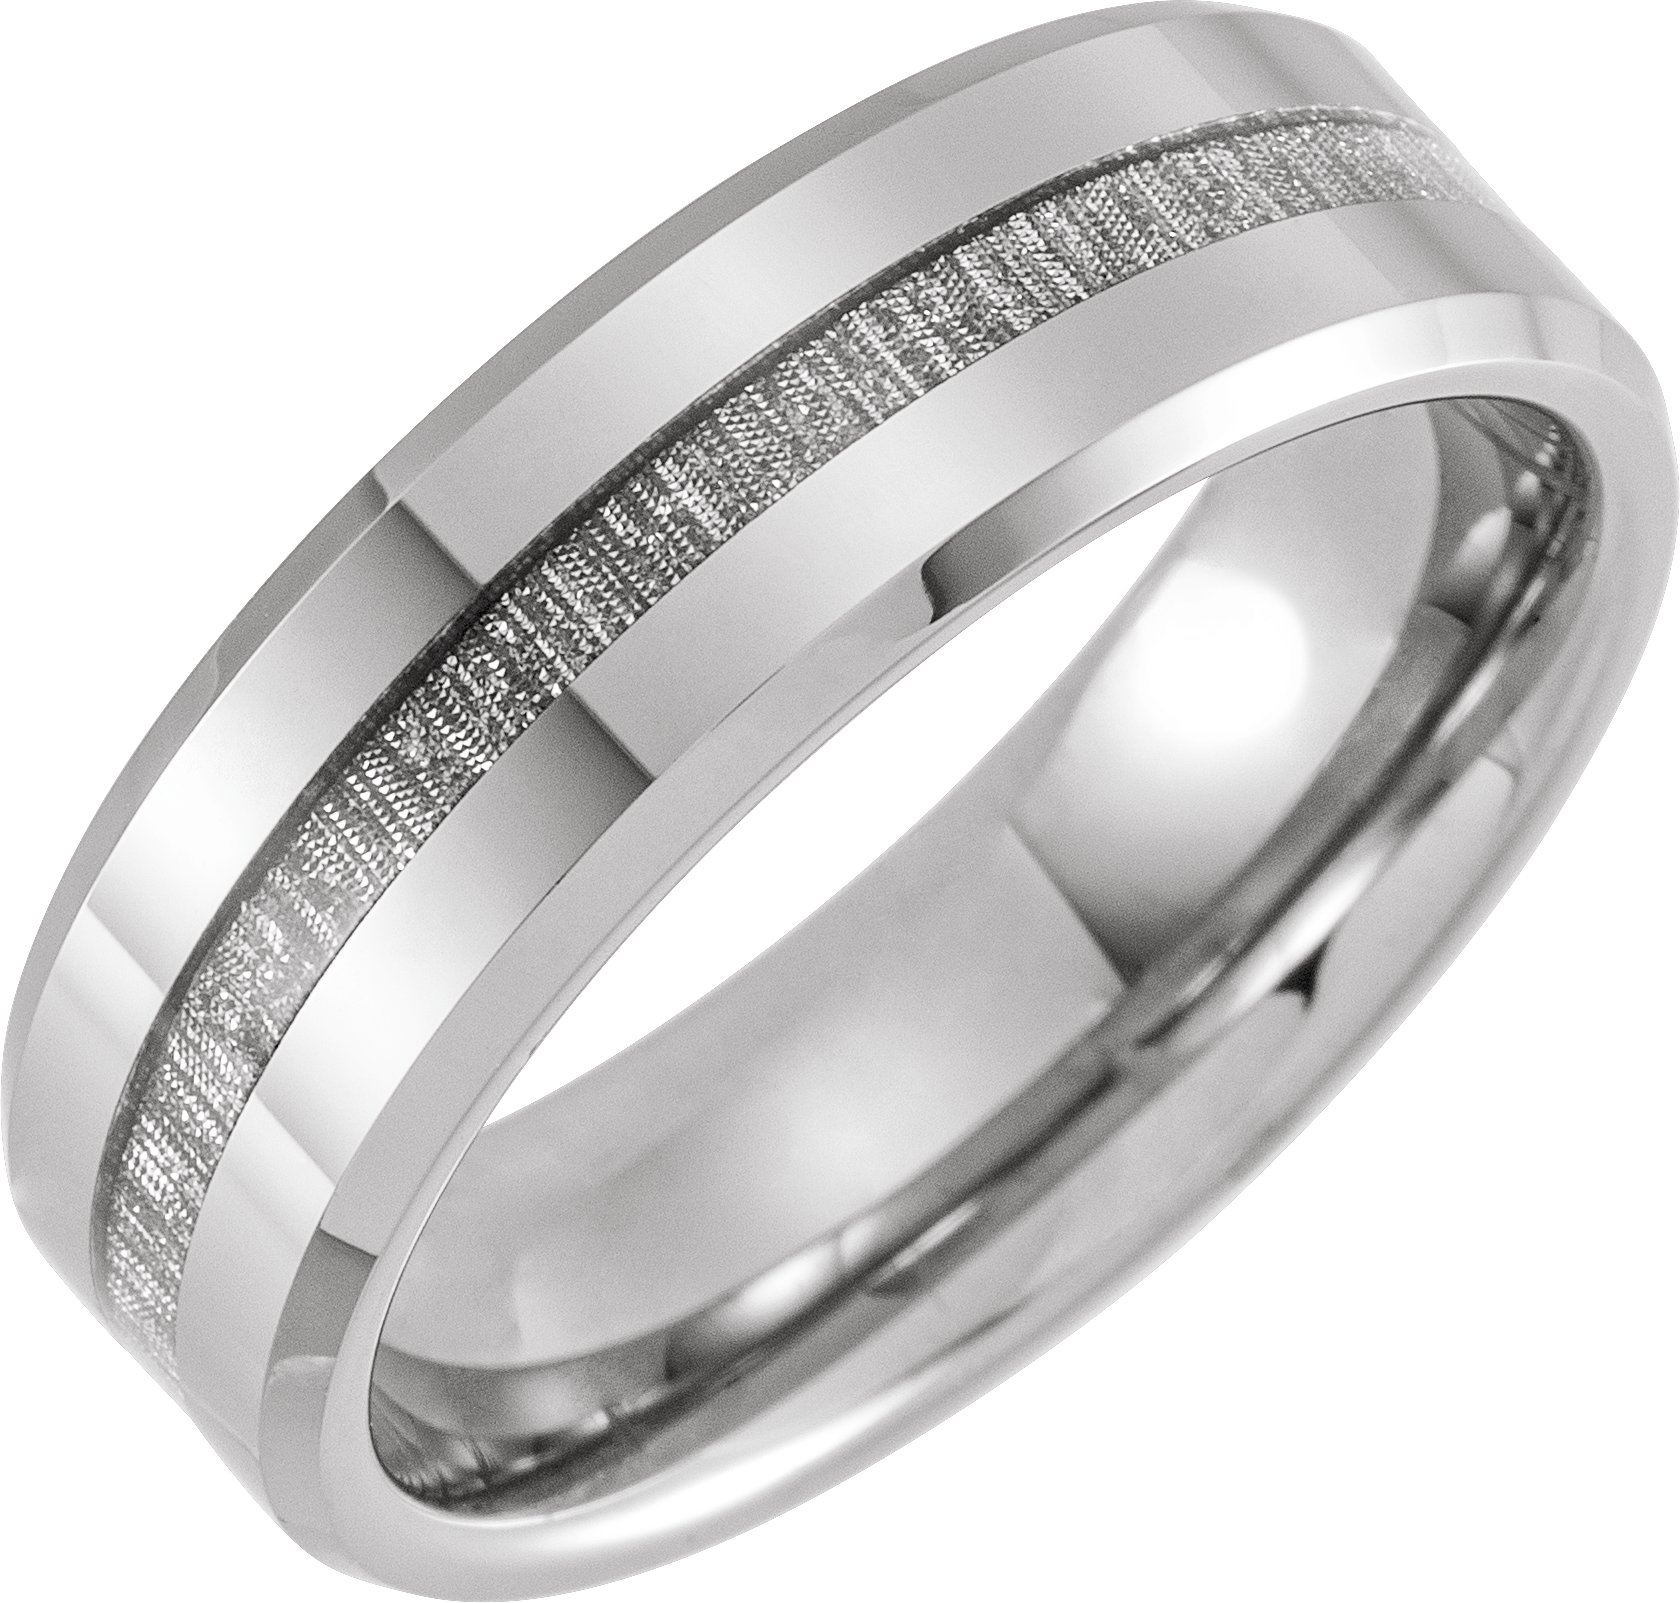 Tungsten 8 mm Beveled Band with Manmade Meteorite Inlay Size 10